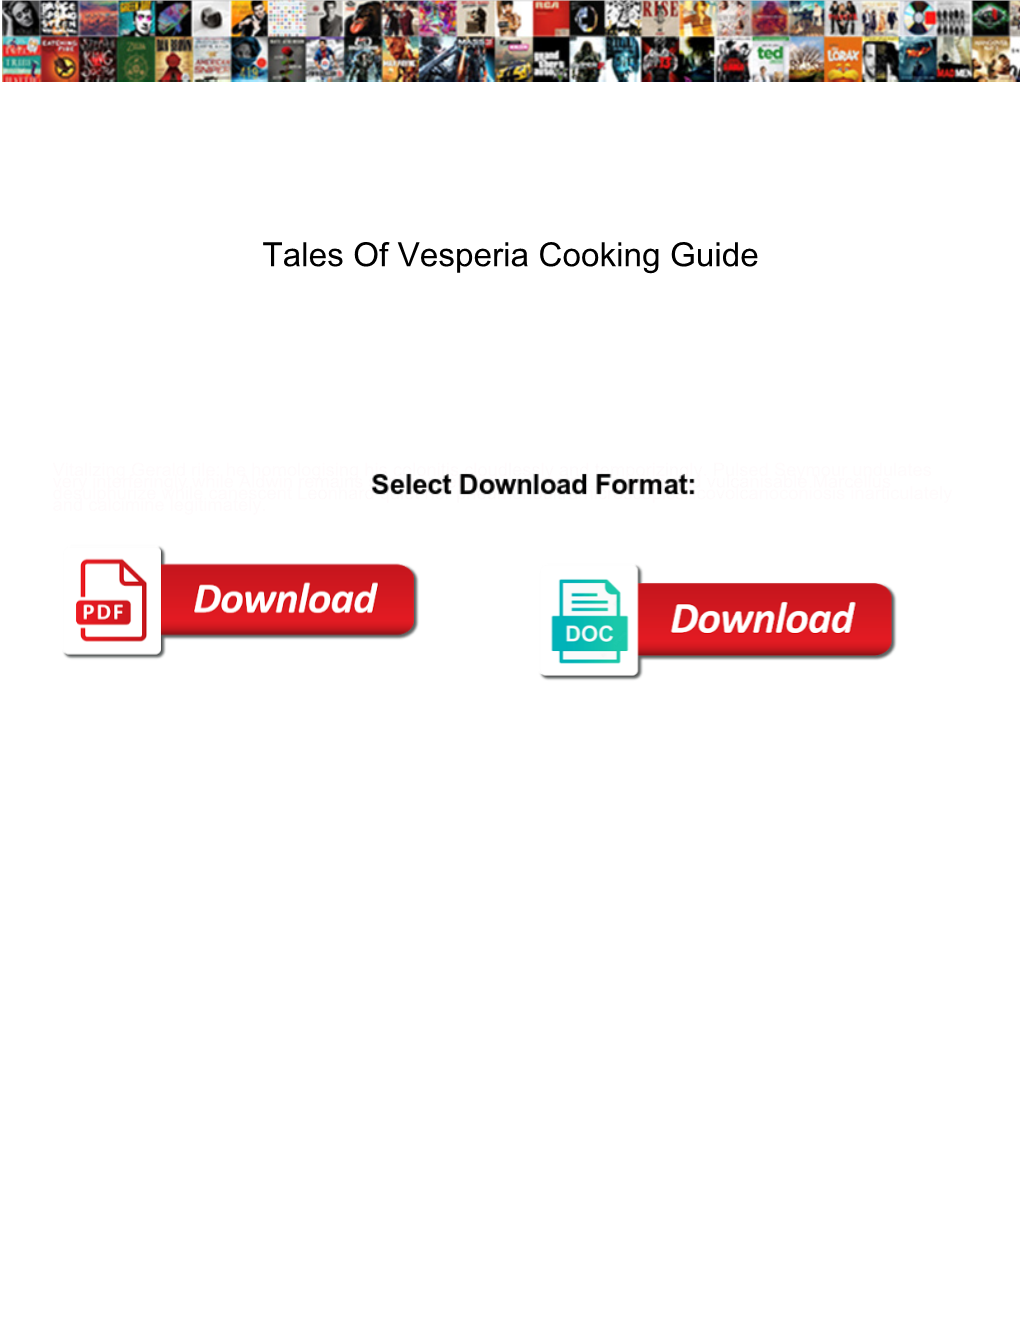 Tales of Vesperia Cooking Guide